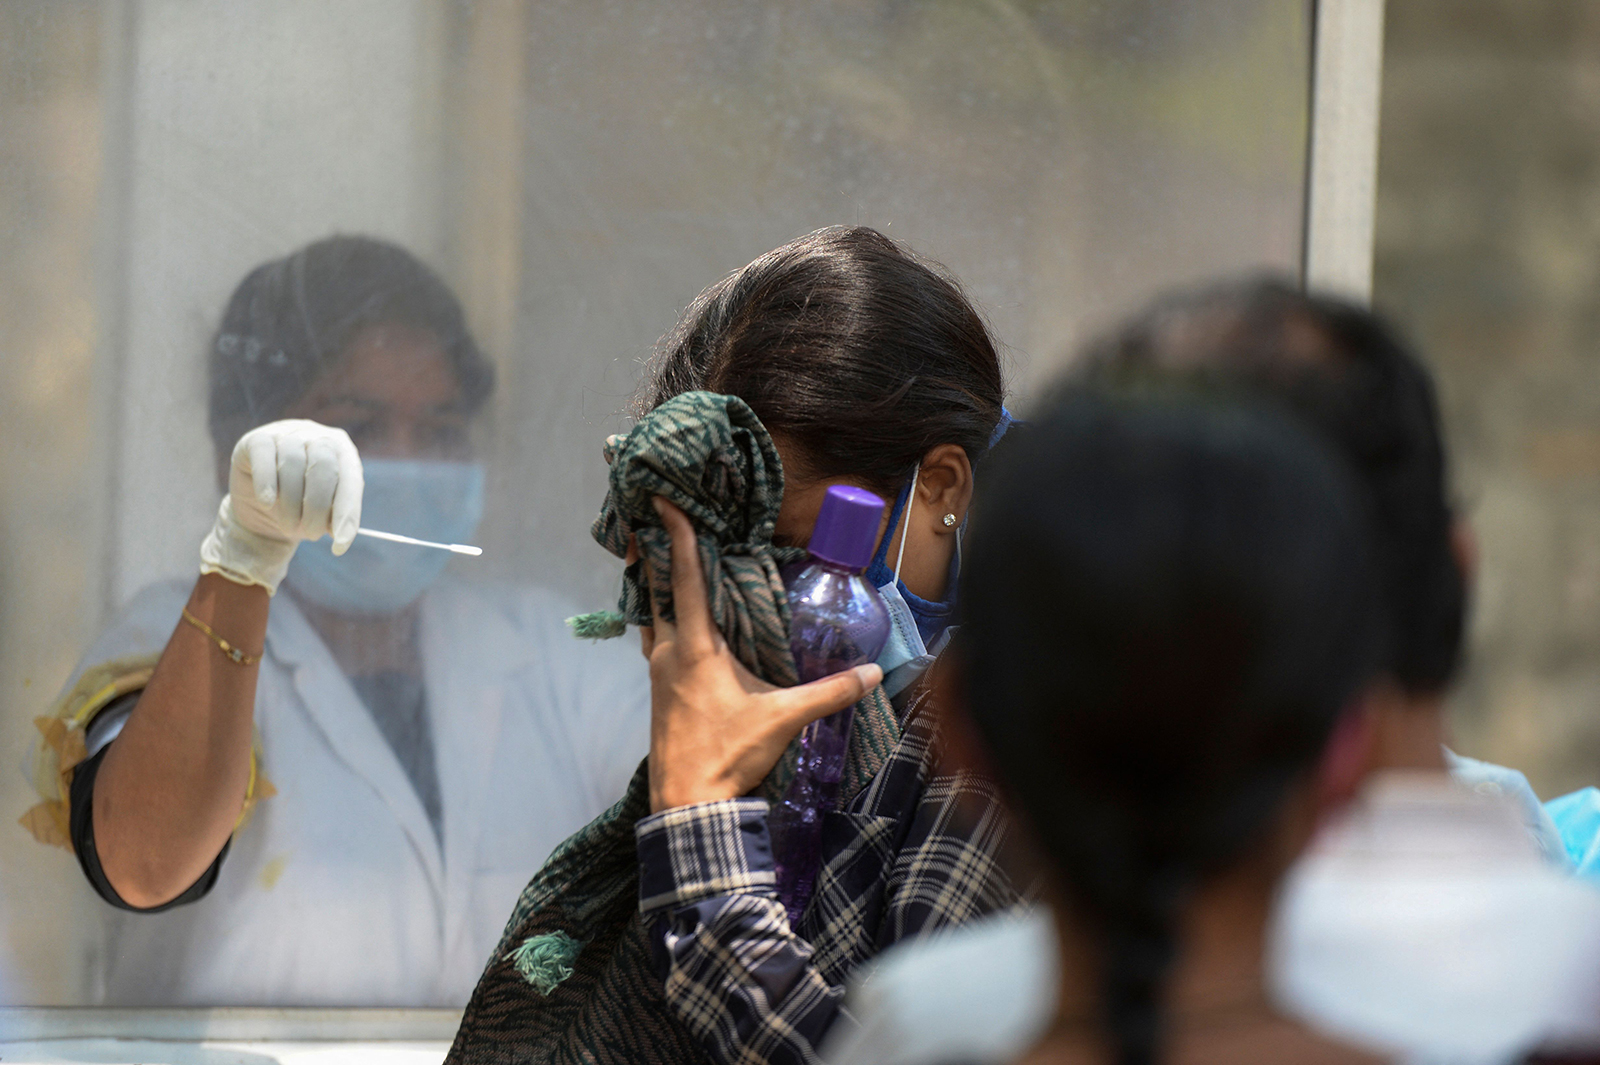 A woman reacts as a health worker prepares to collect a nasal swab sample to test for Covid-19 at a primary health center, in Hyderabad, India, on May 3.